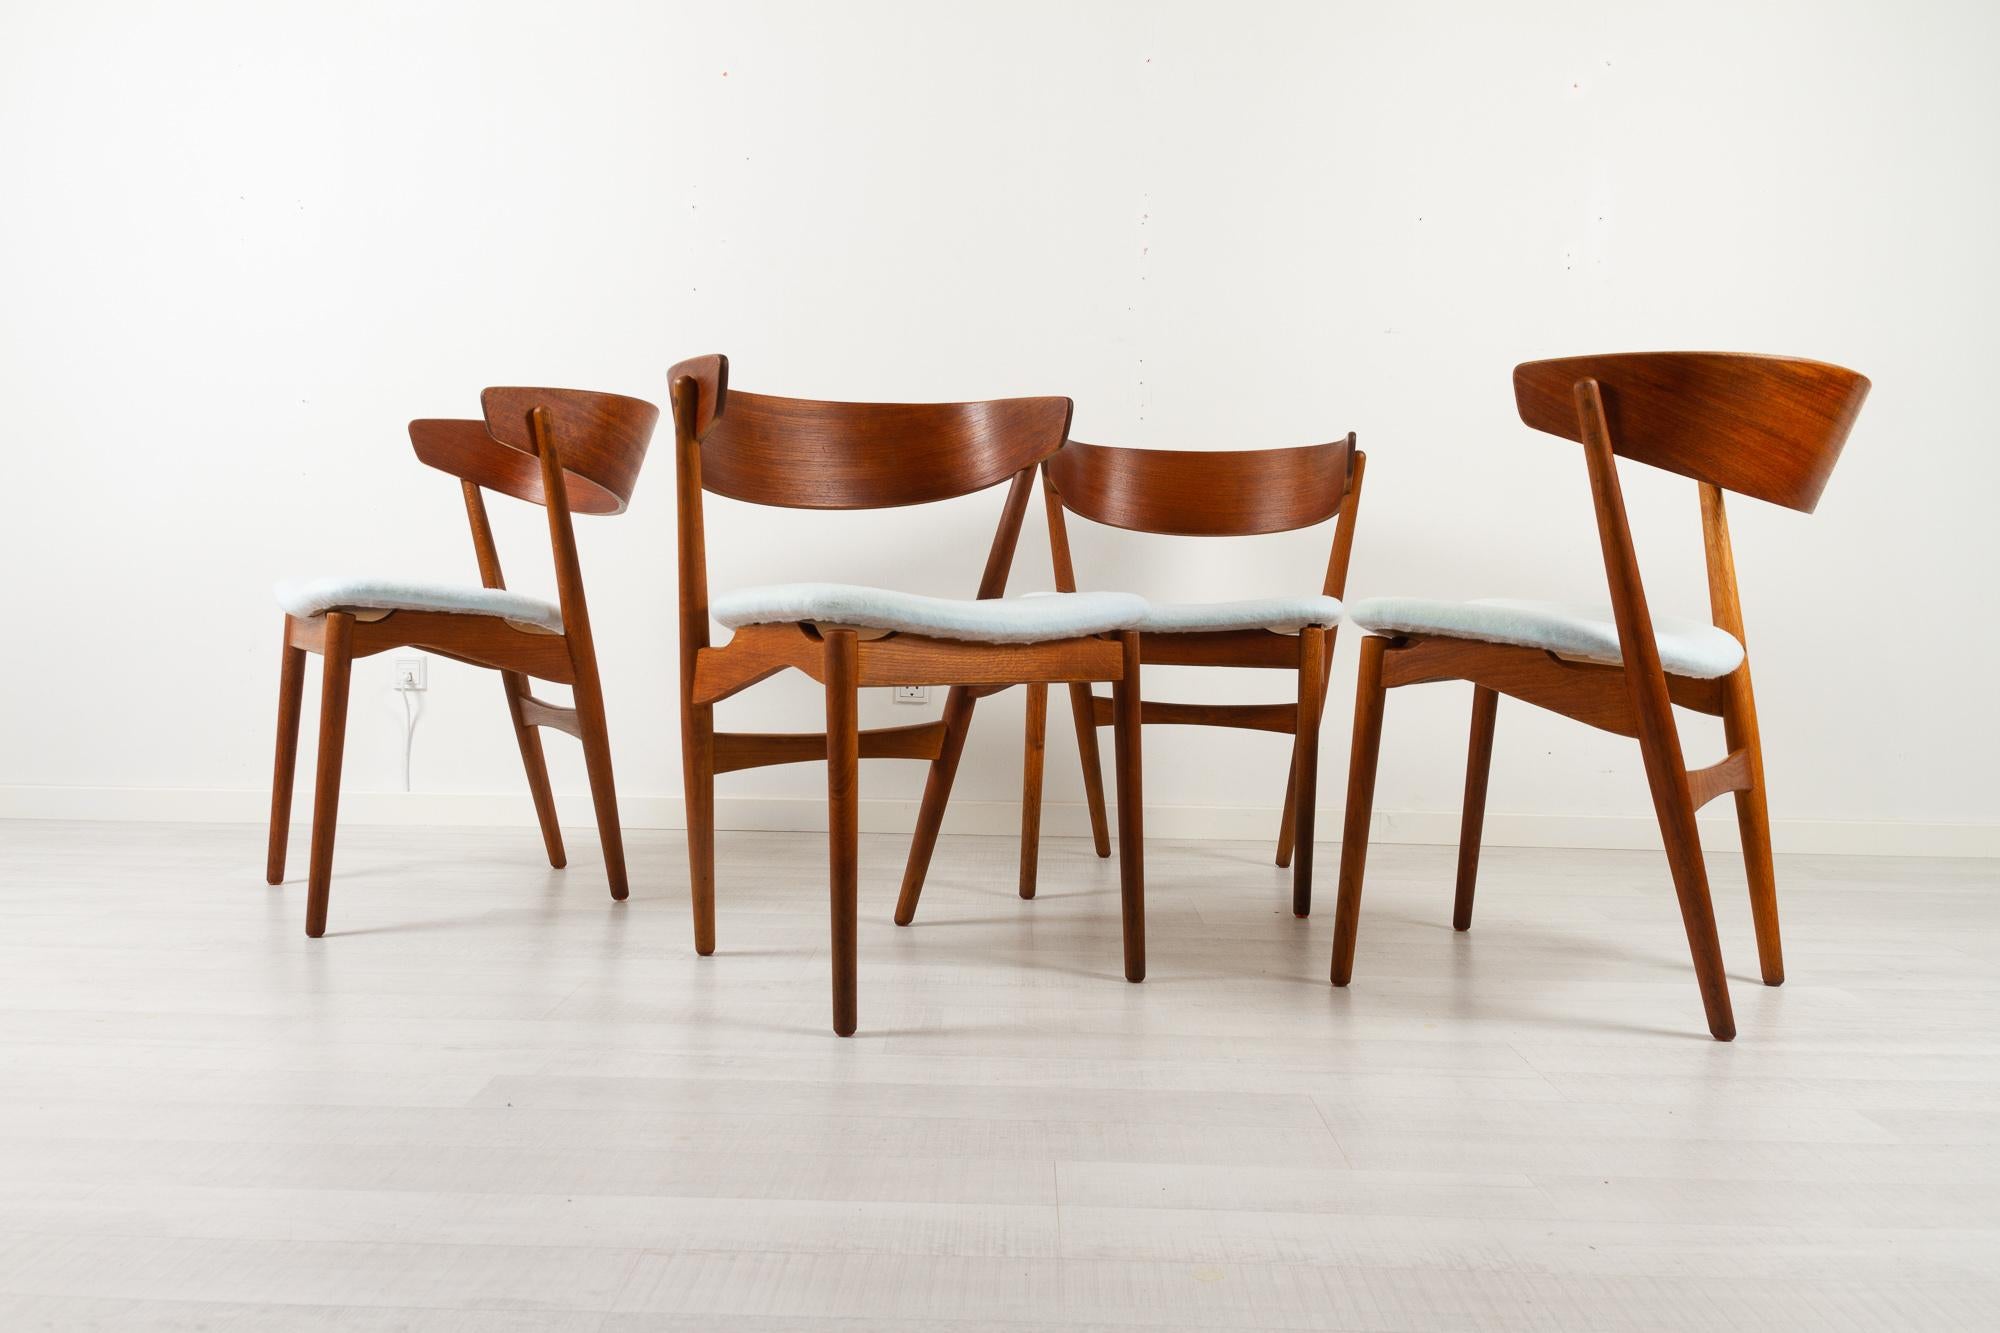 Vintage danish teak dining chairs model 7 by Helge Sibast 1960s Set of 4
Set of four stunning Danish Mid-century modern dining chairs designed in the 1950s by Danish master carpenter Helge Sibast and made by Sibast Møbler Denmark in the